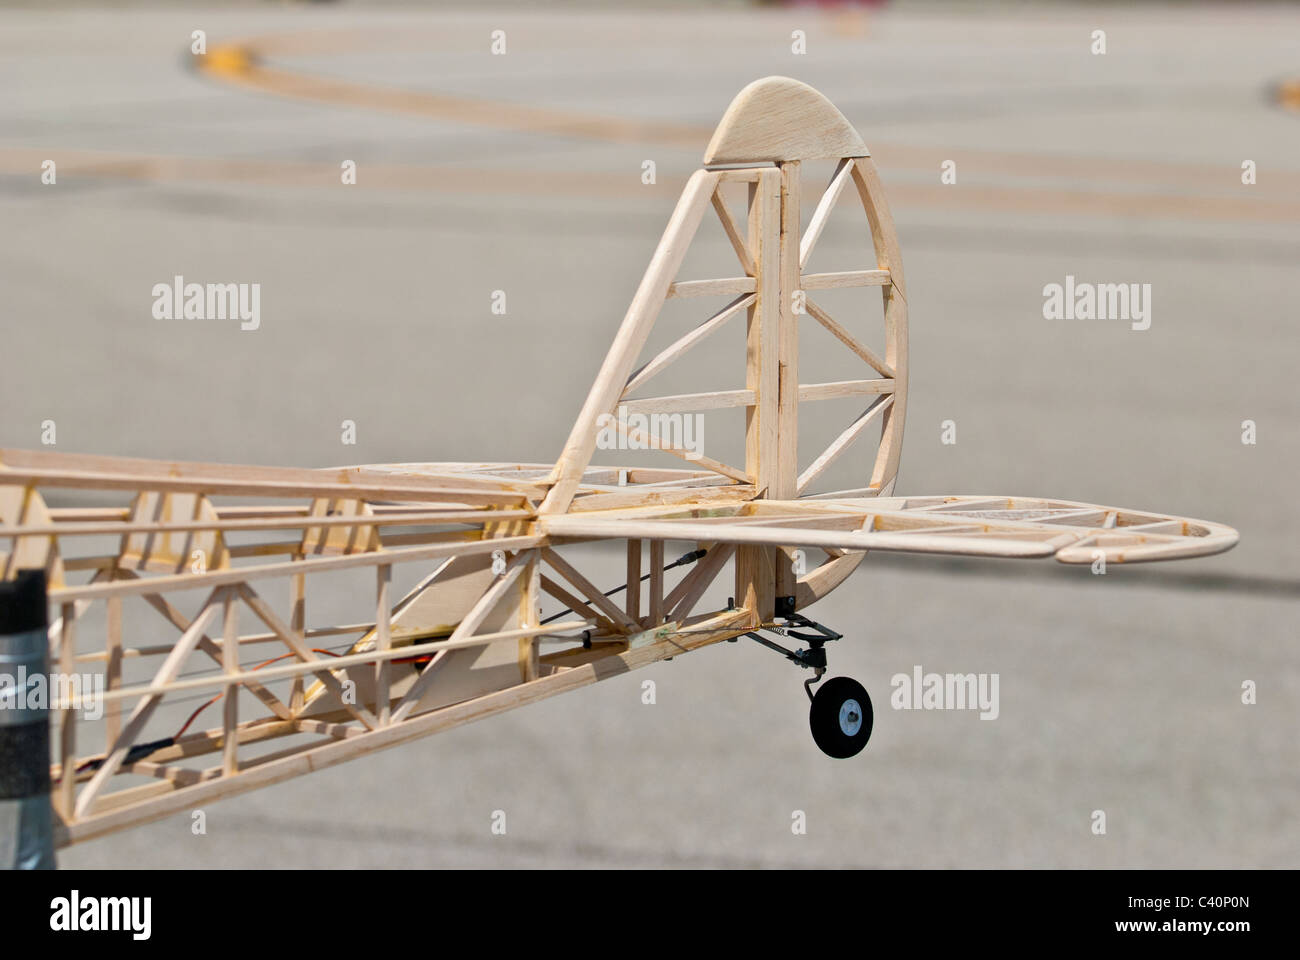 Model Airplane tail structure.  Balsa wood construction. Stock Photo